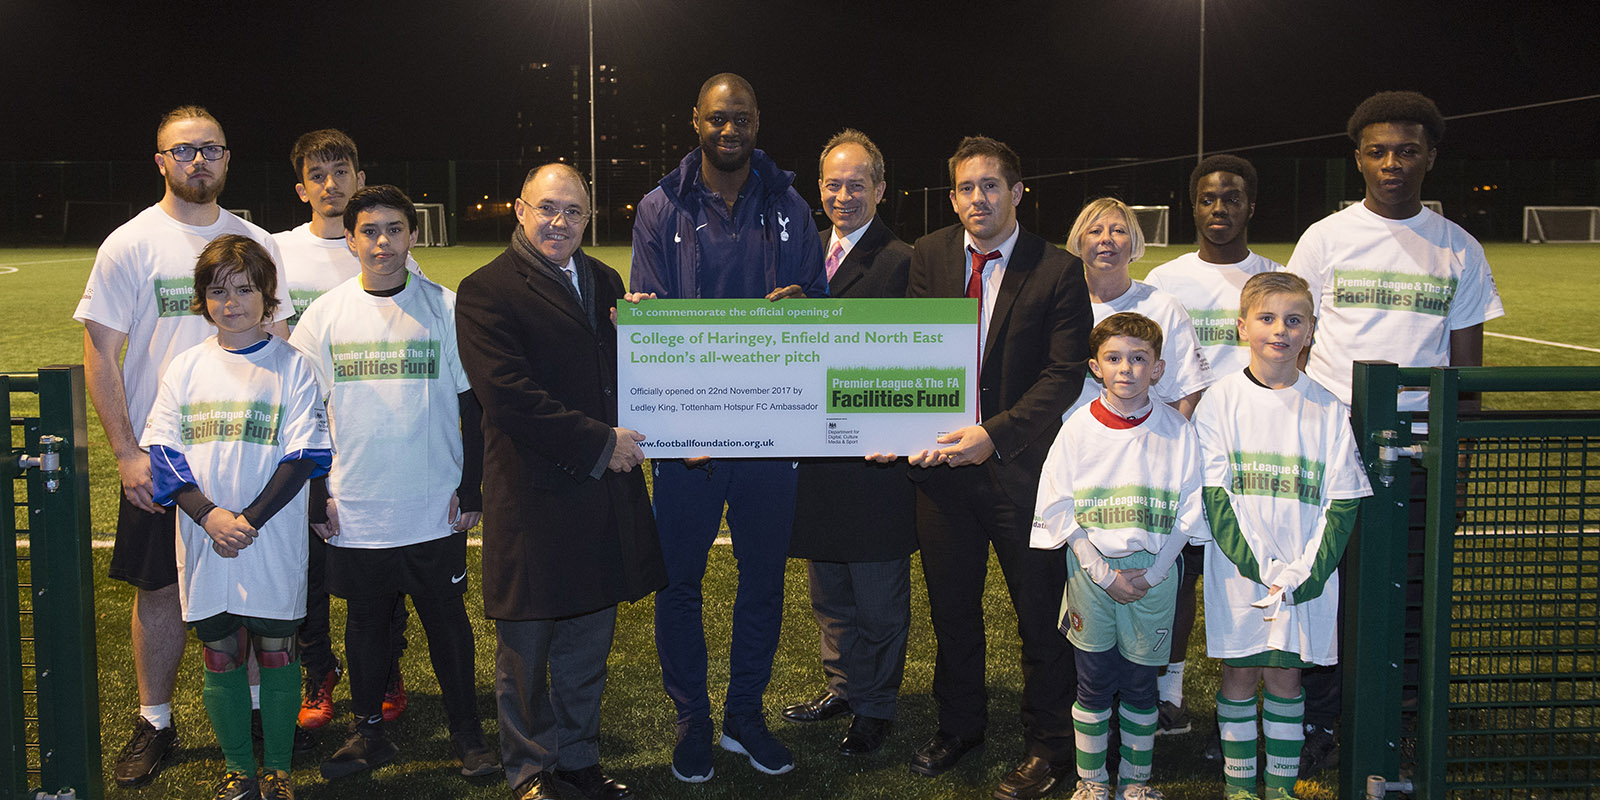 Ledley King unveils the new all-weather pitch at The College of Haringey, Enfield and North East London 